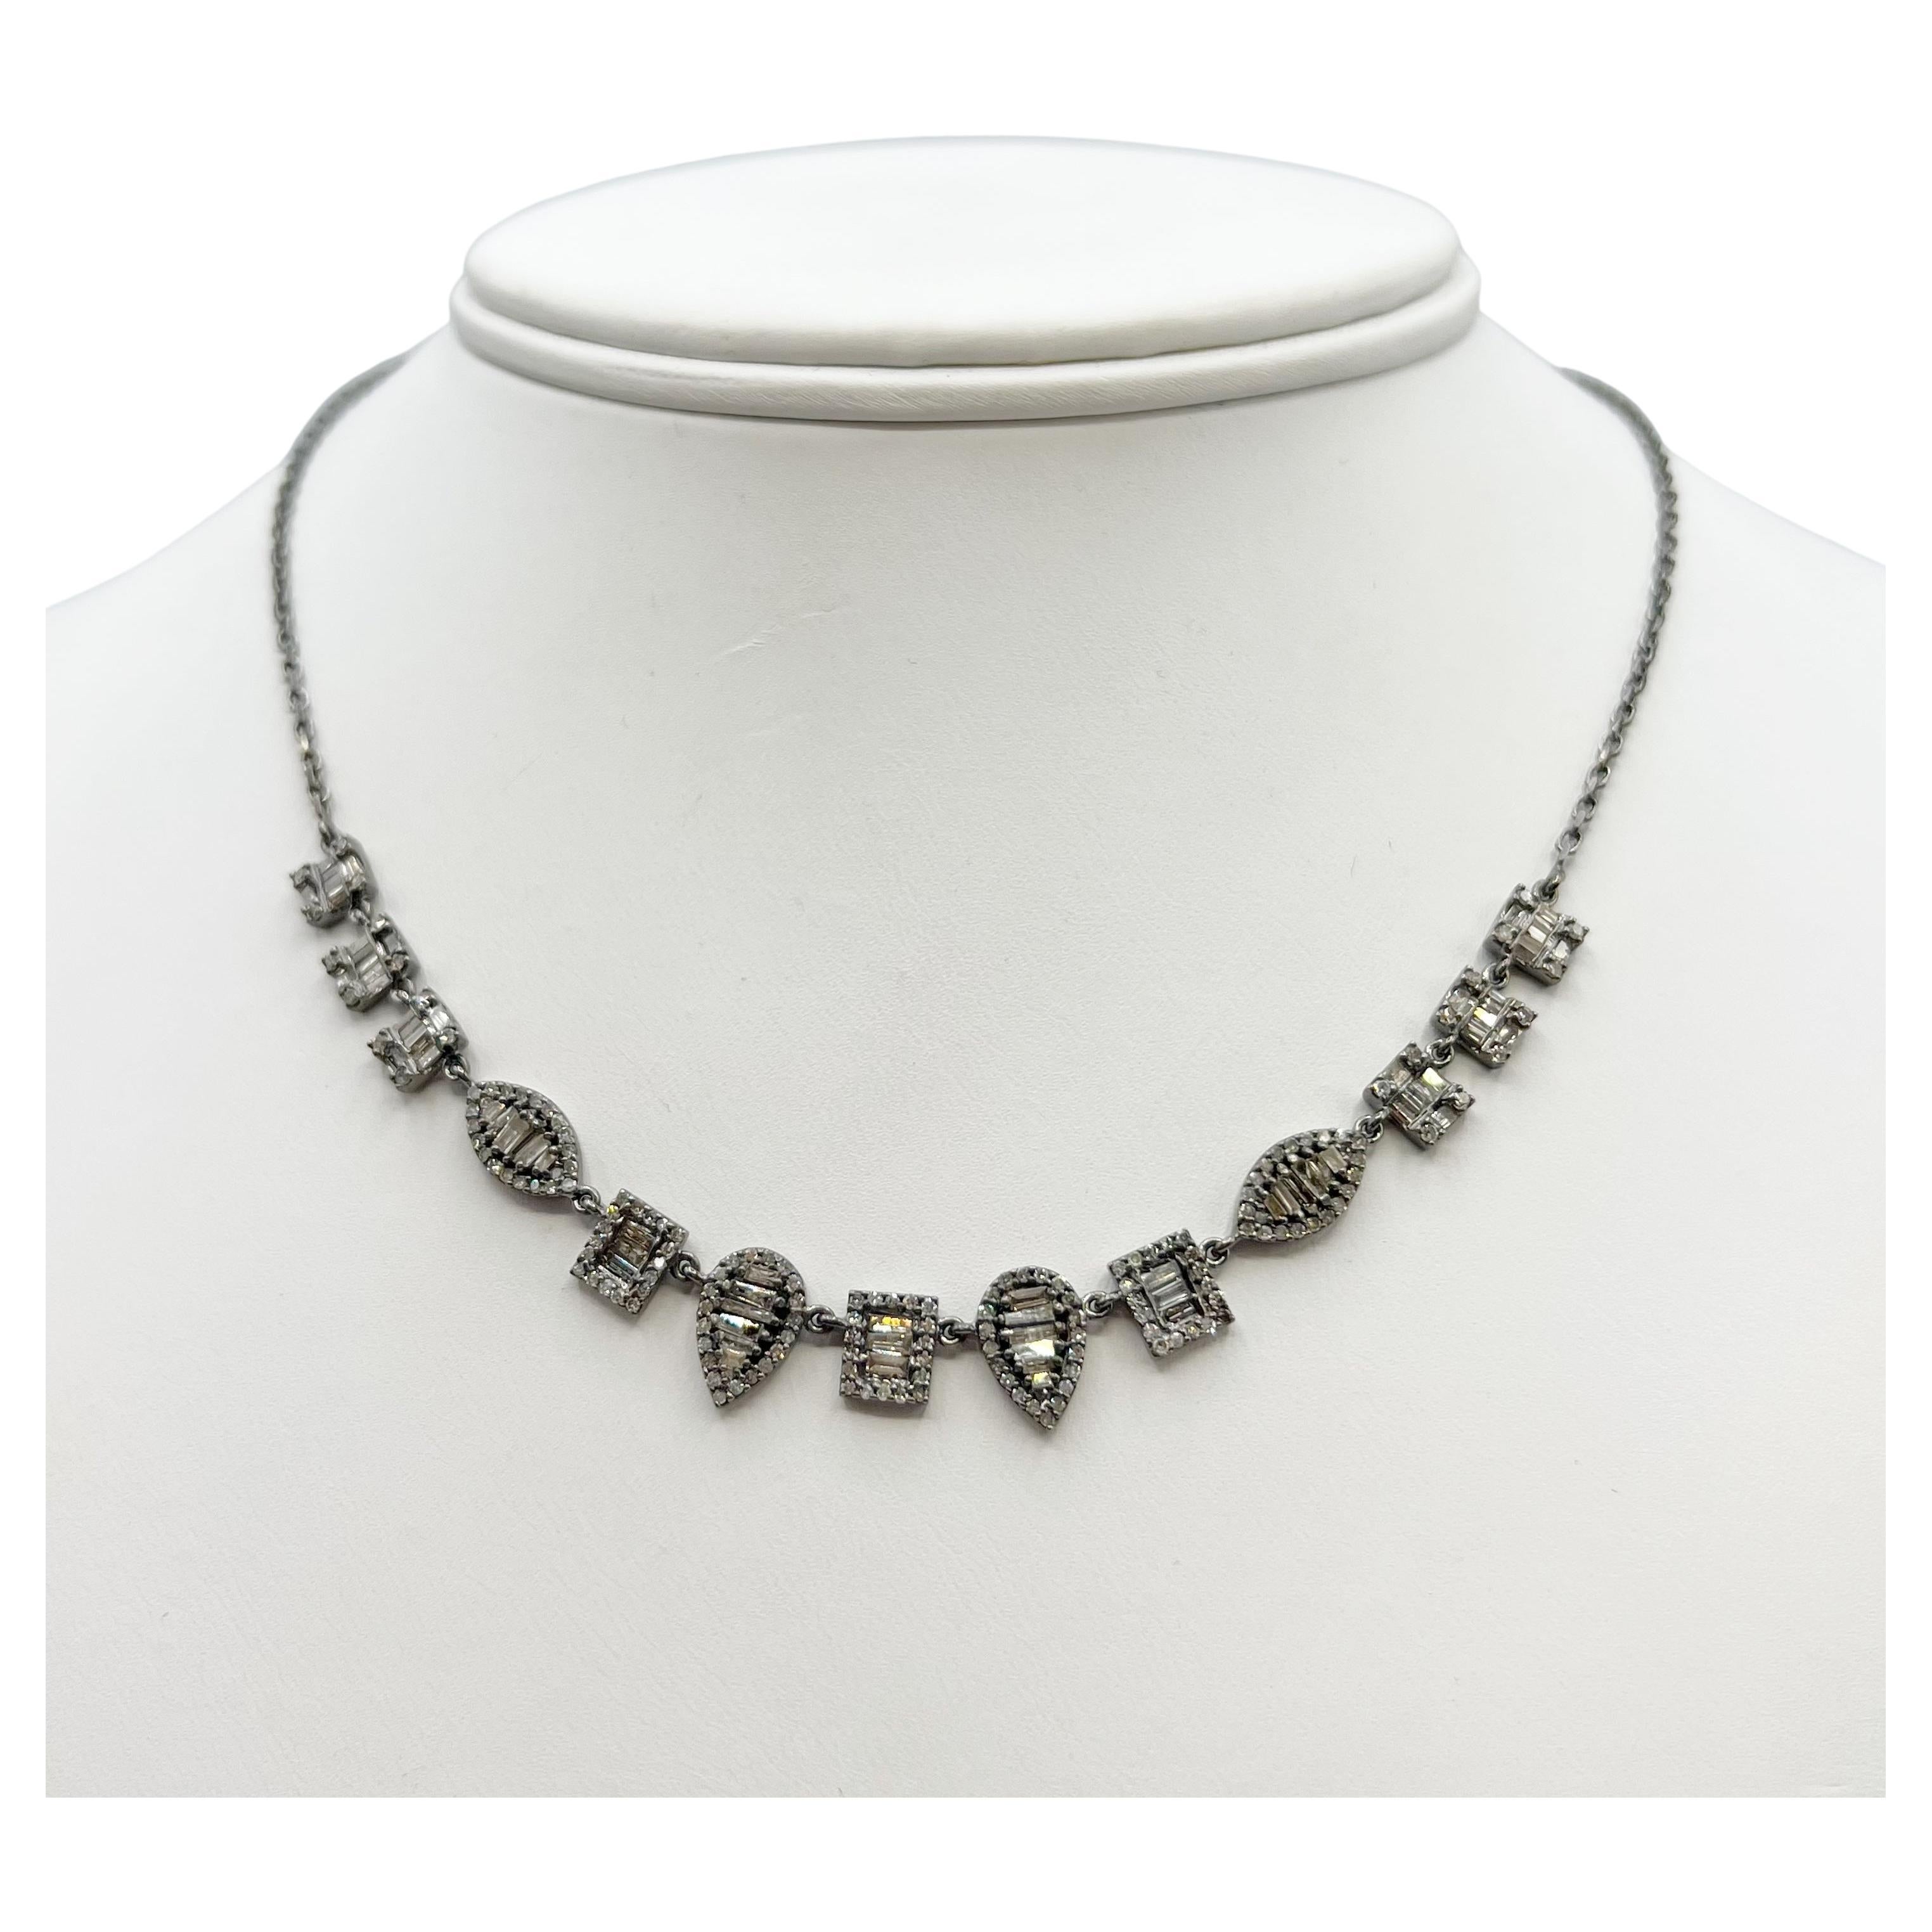 This diamond baguette Necklace is stunning. The total diamond weight is 2.11 carats set in geometric shapes strung together on a sterling silver oxidized chain. The length is 16 1/4 inches so it sits nicely on the collarbone. This necklace is modern